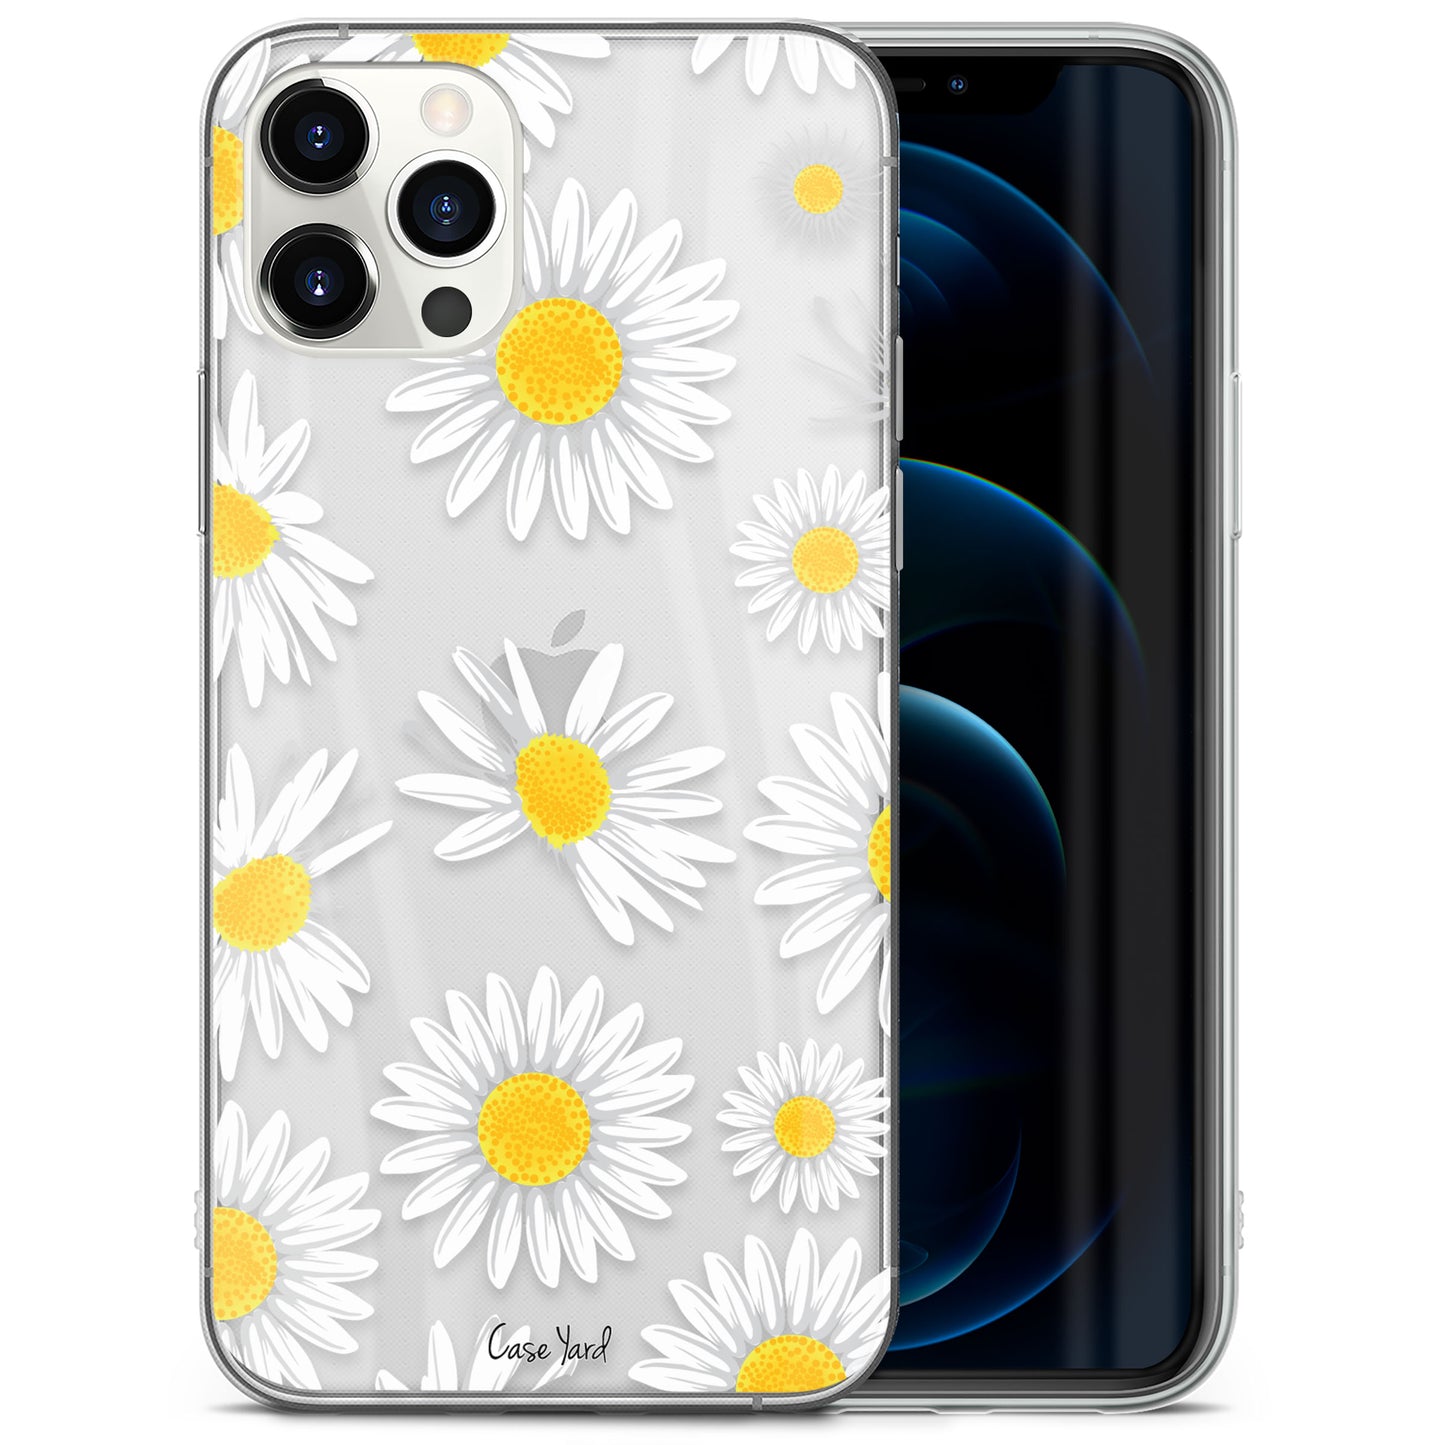 TPU Case Clear case with (Daisy Wheels) Design for iPhone & Samsung Phones